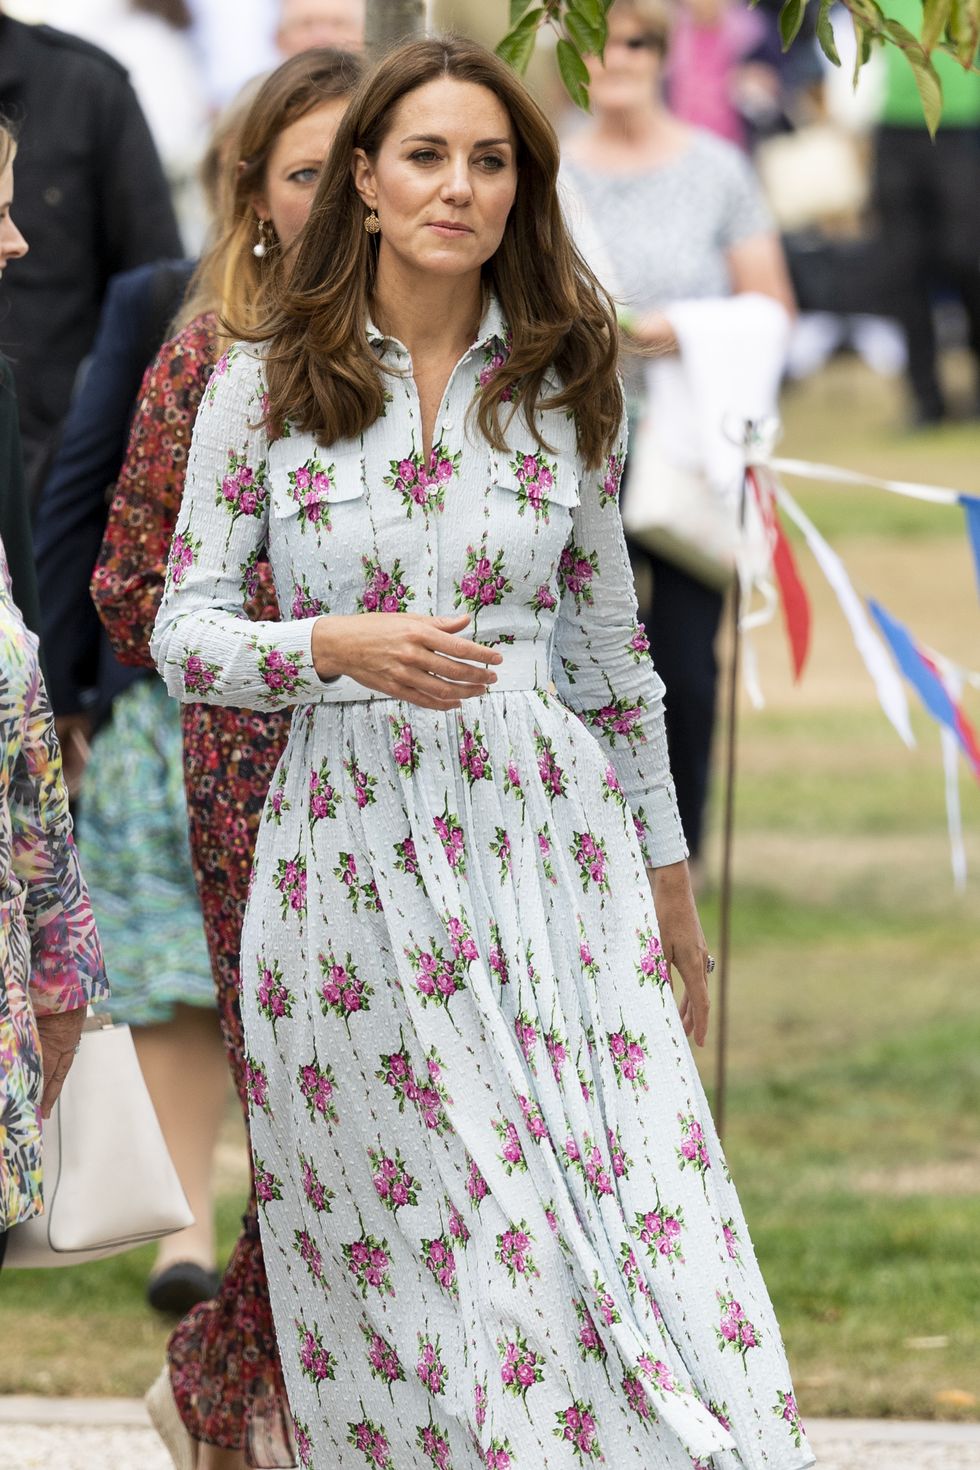 Catherine, Duchess of Cambridge - Fashion Styles and Outfits